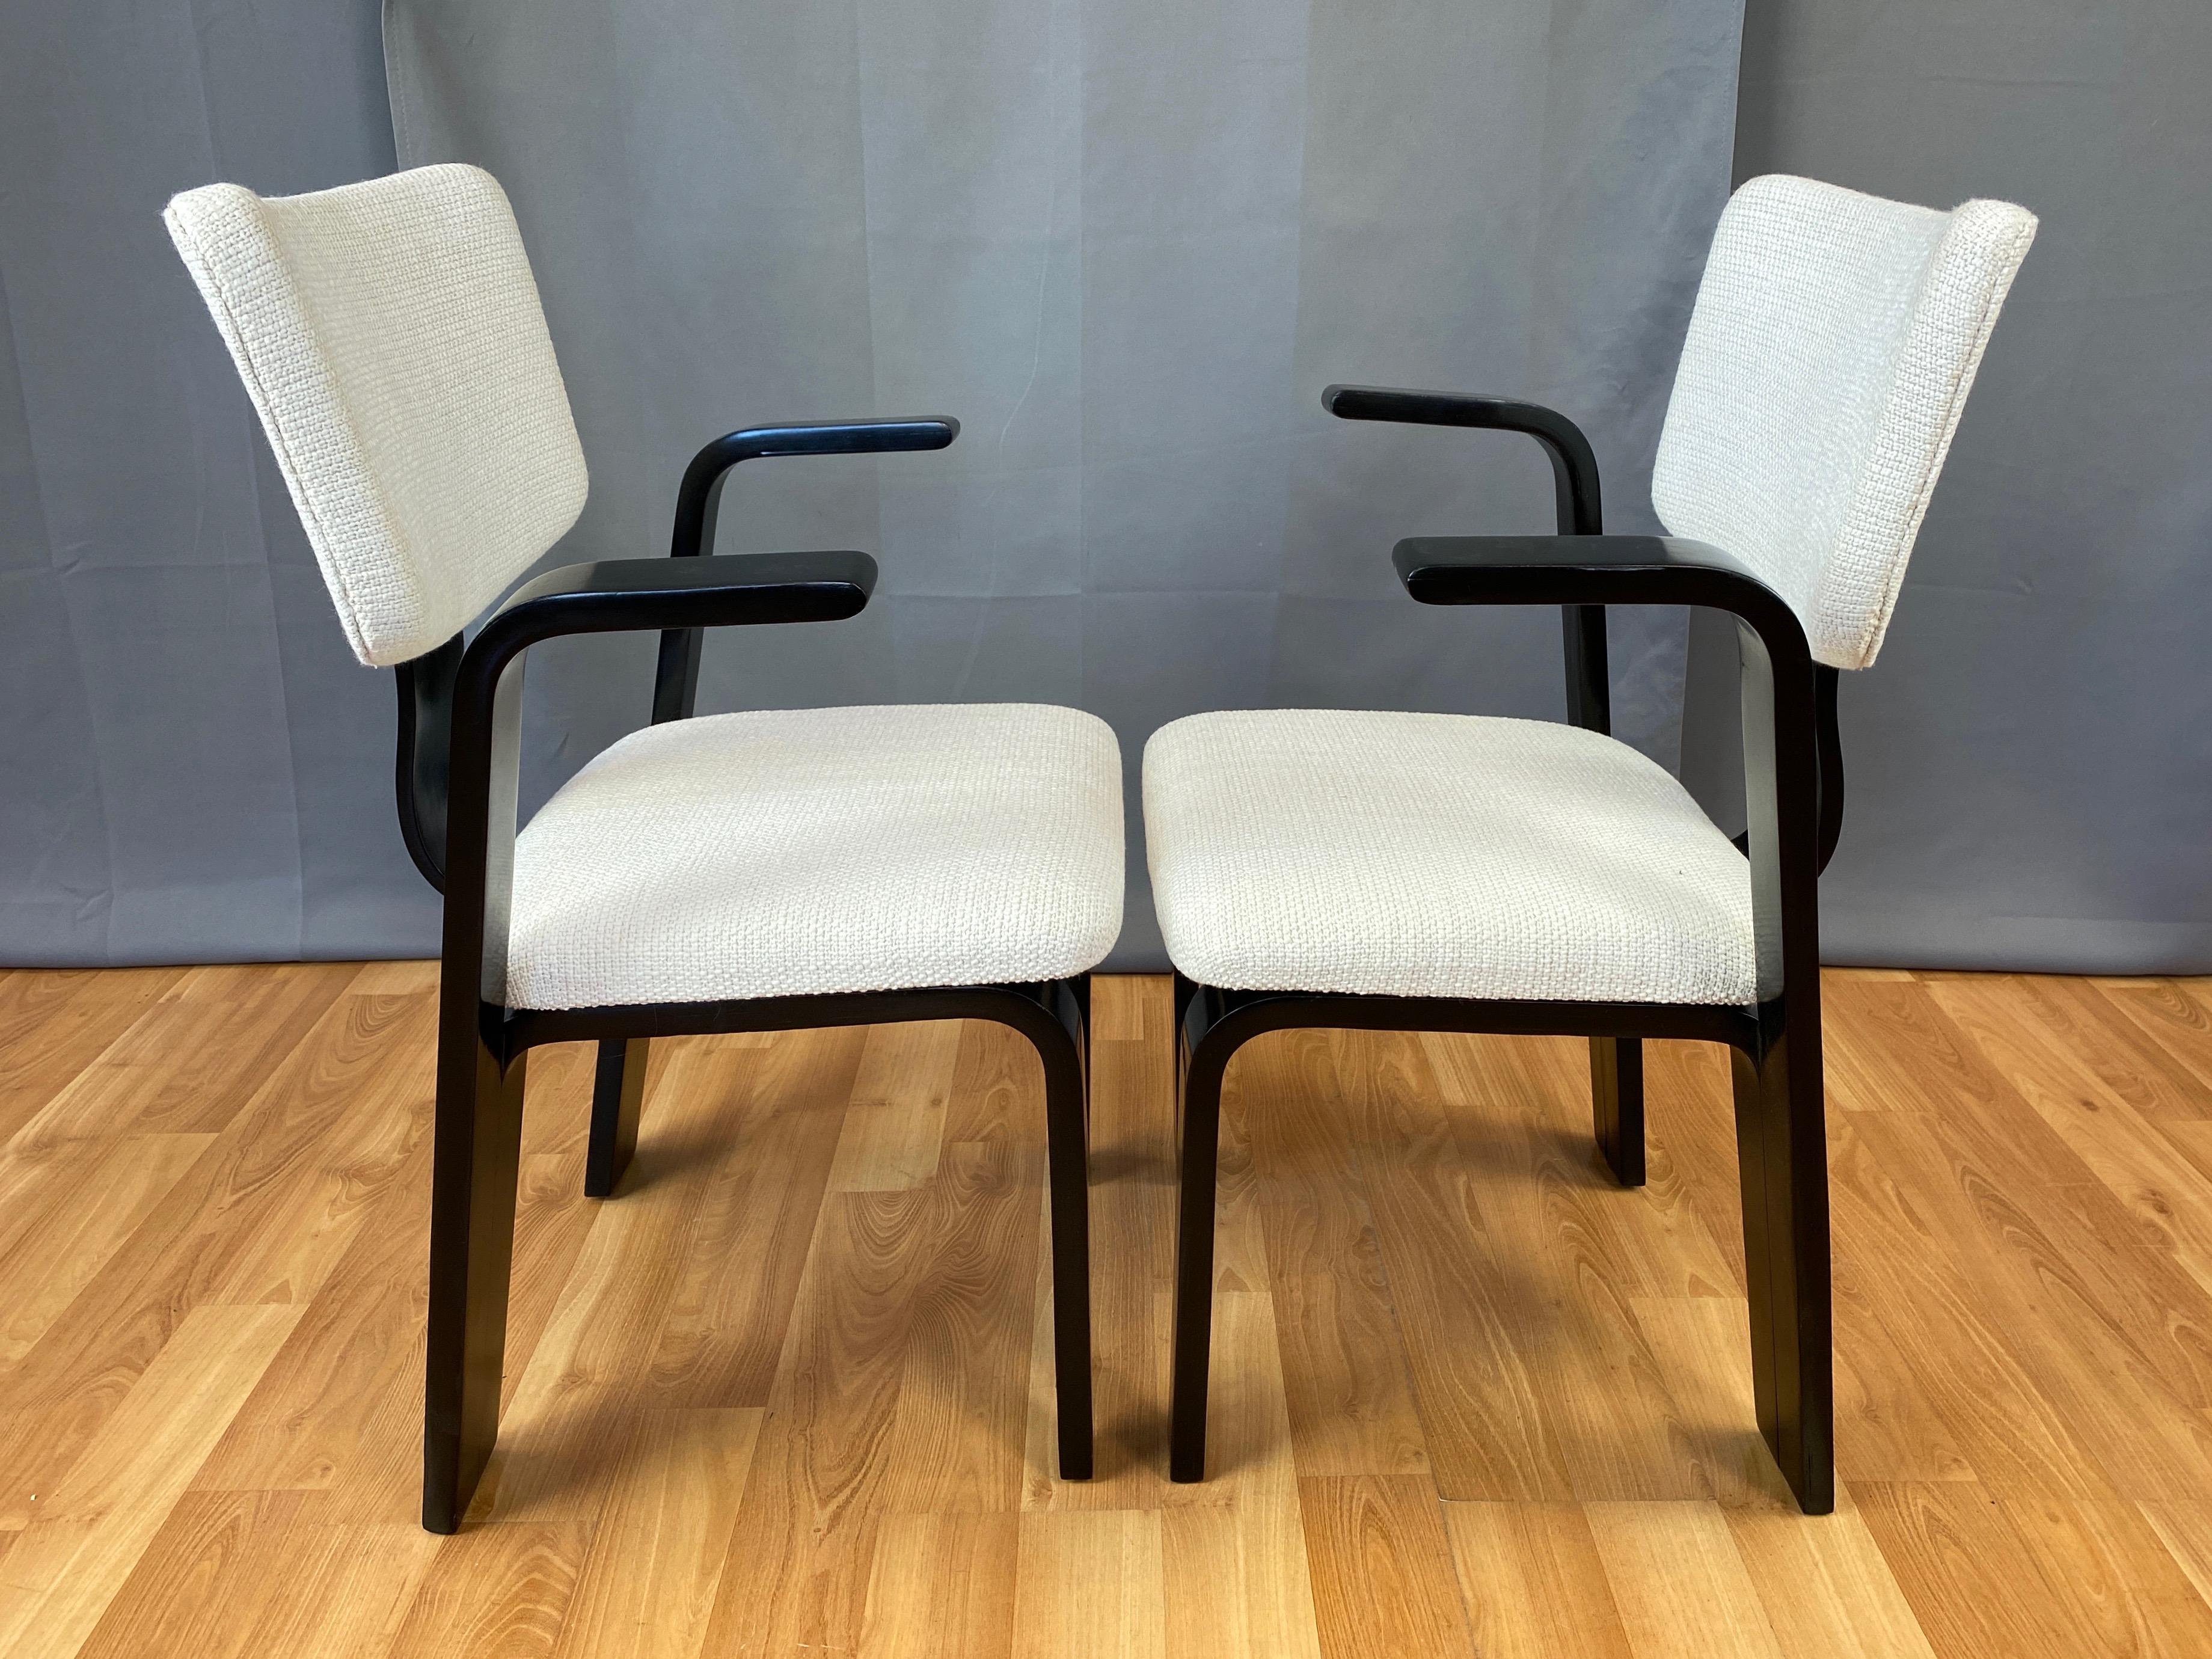 Pair of Thonet Black Lacquered Bentwood Armchairs with Upholstered Seats, 1940s For Sale 4